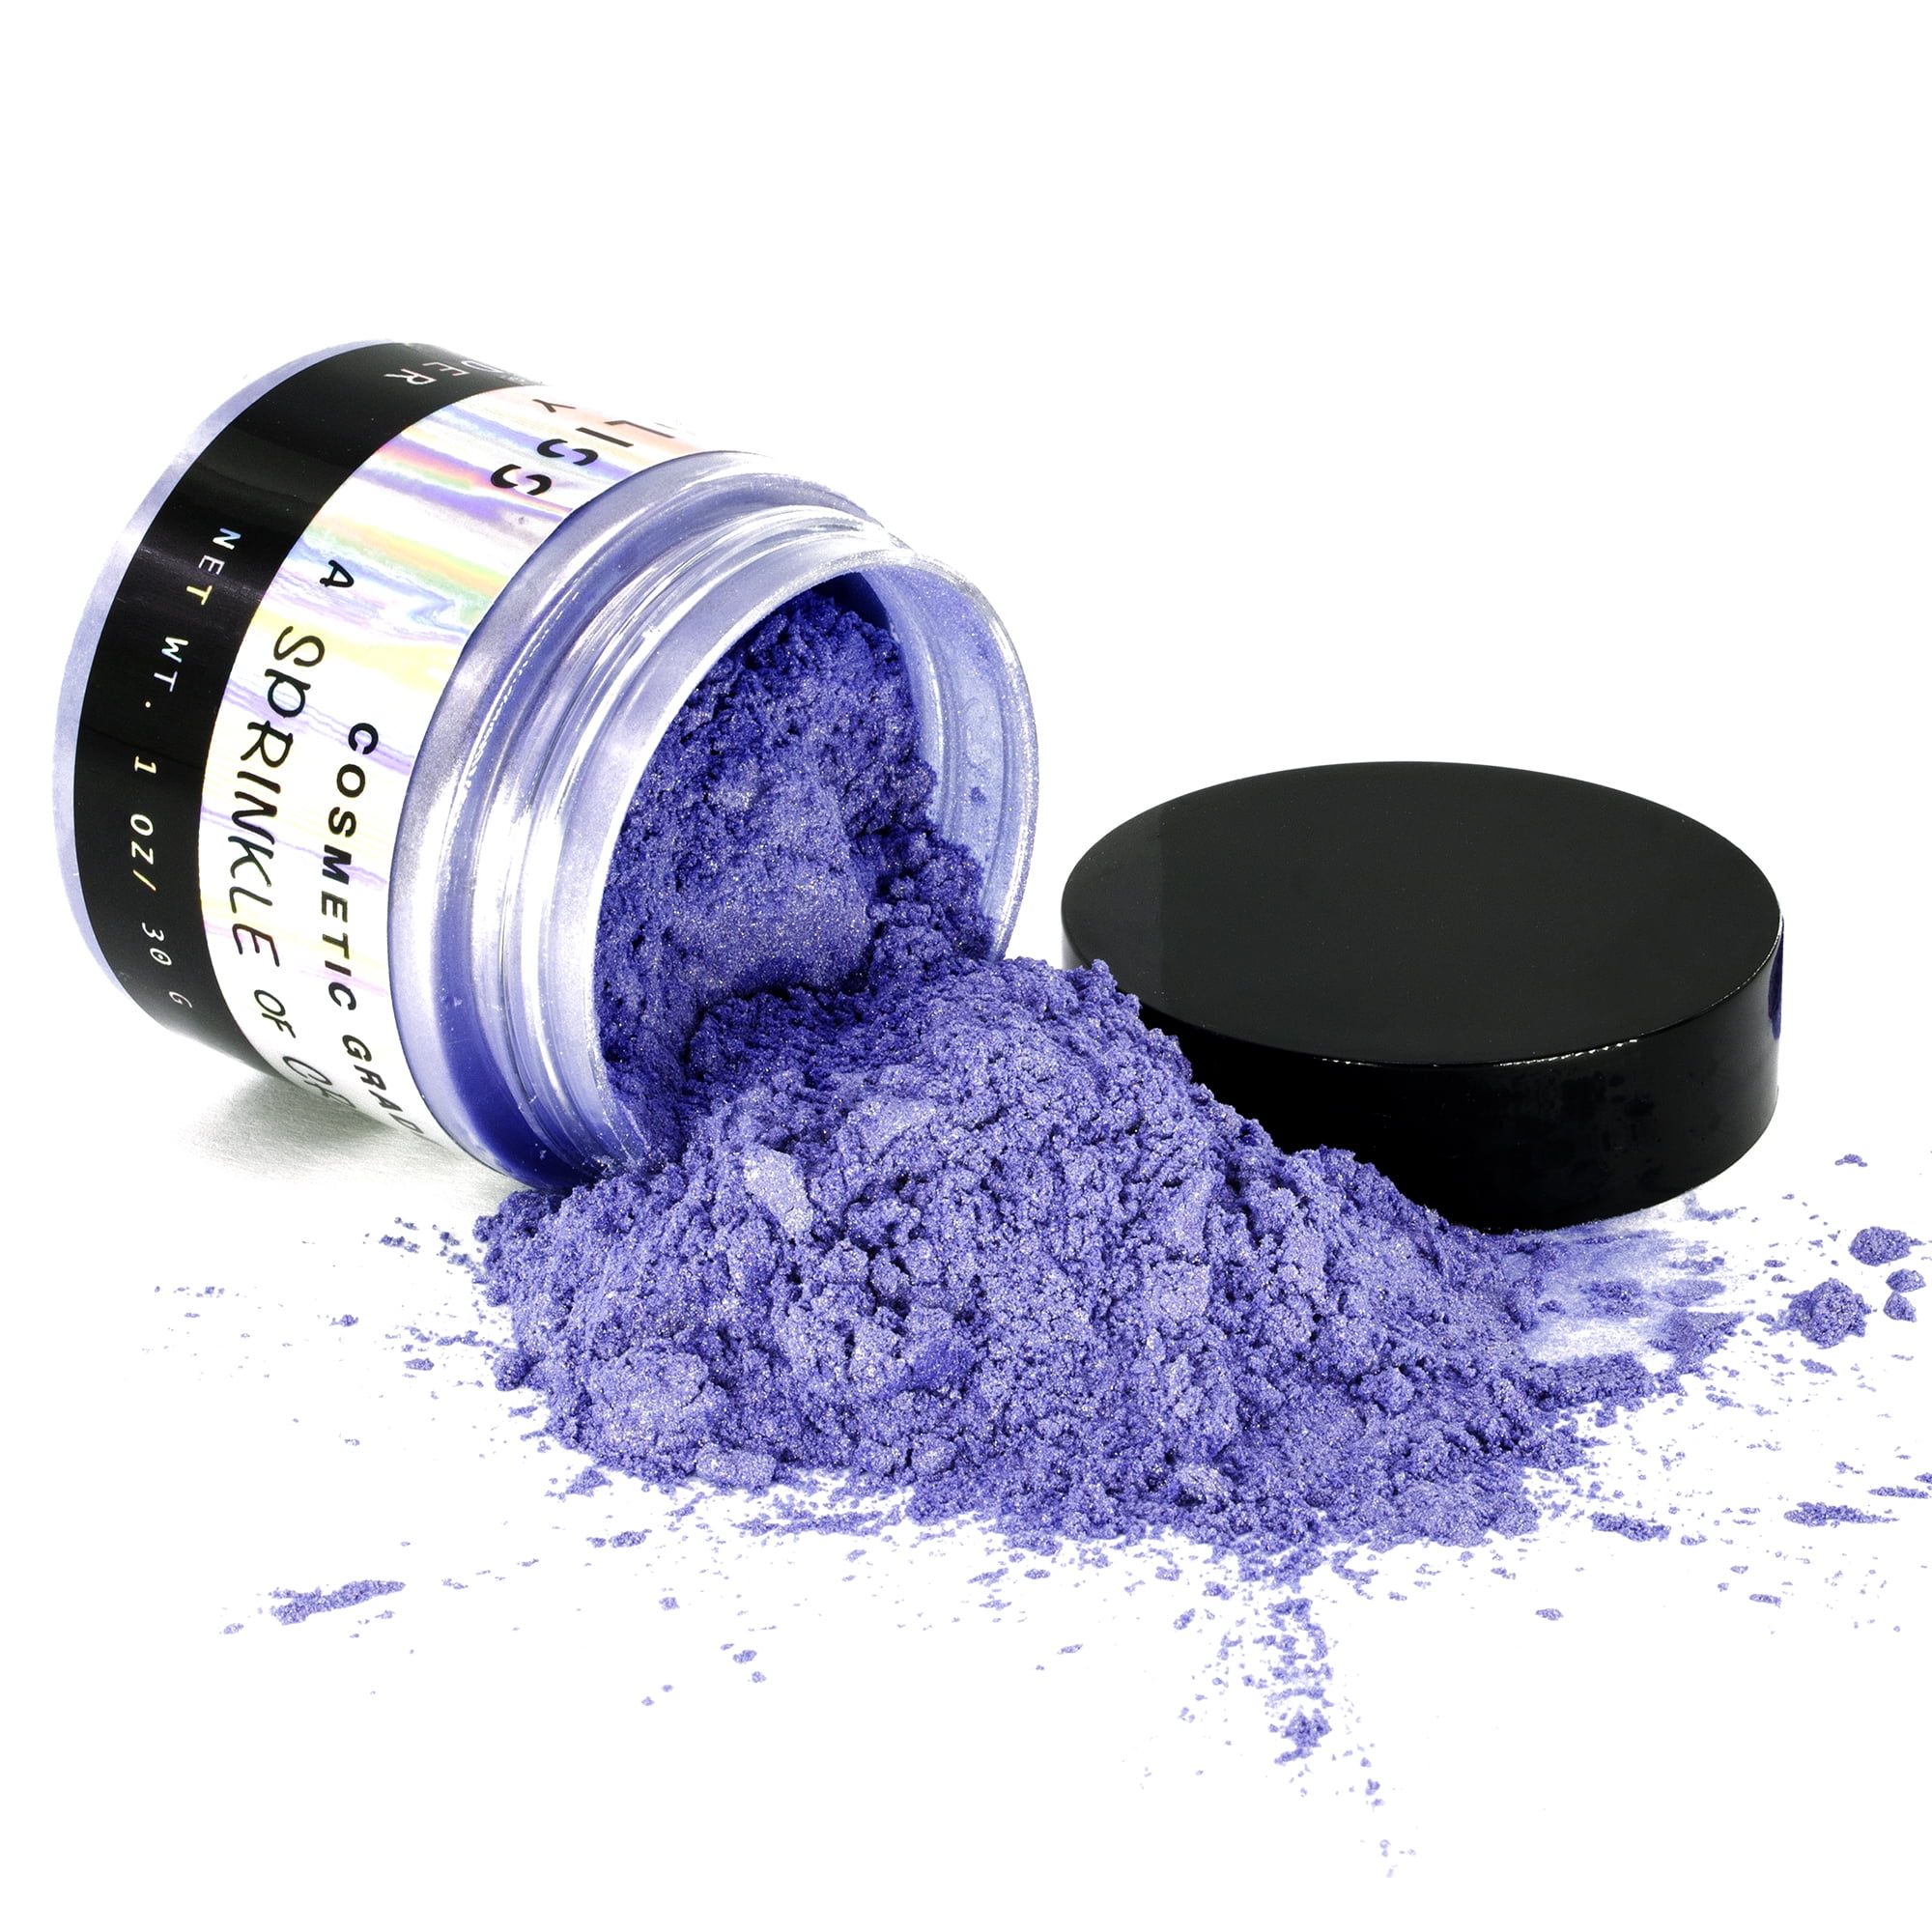 Electric Bliss Beauty, Mica Powder, Lavender Purple-Crafts, Slime, Dye, Bath Bombs, Epoxy Soap, Clay, Nail Art, Glue, and Paper DIY crafts! - Walmart.com